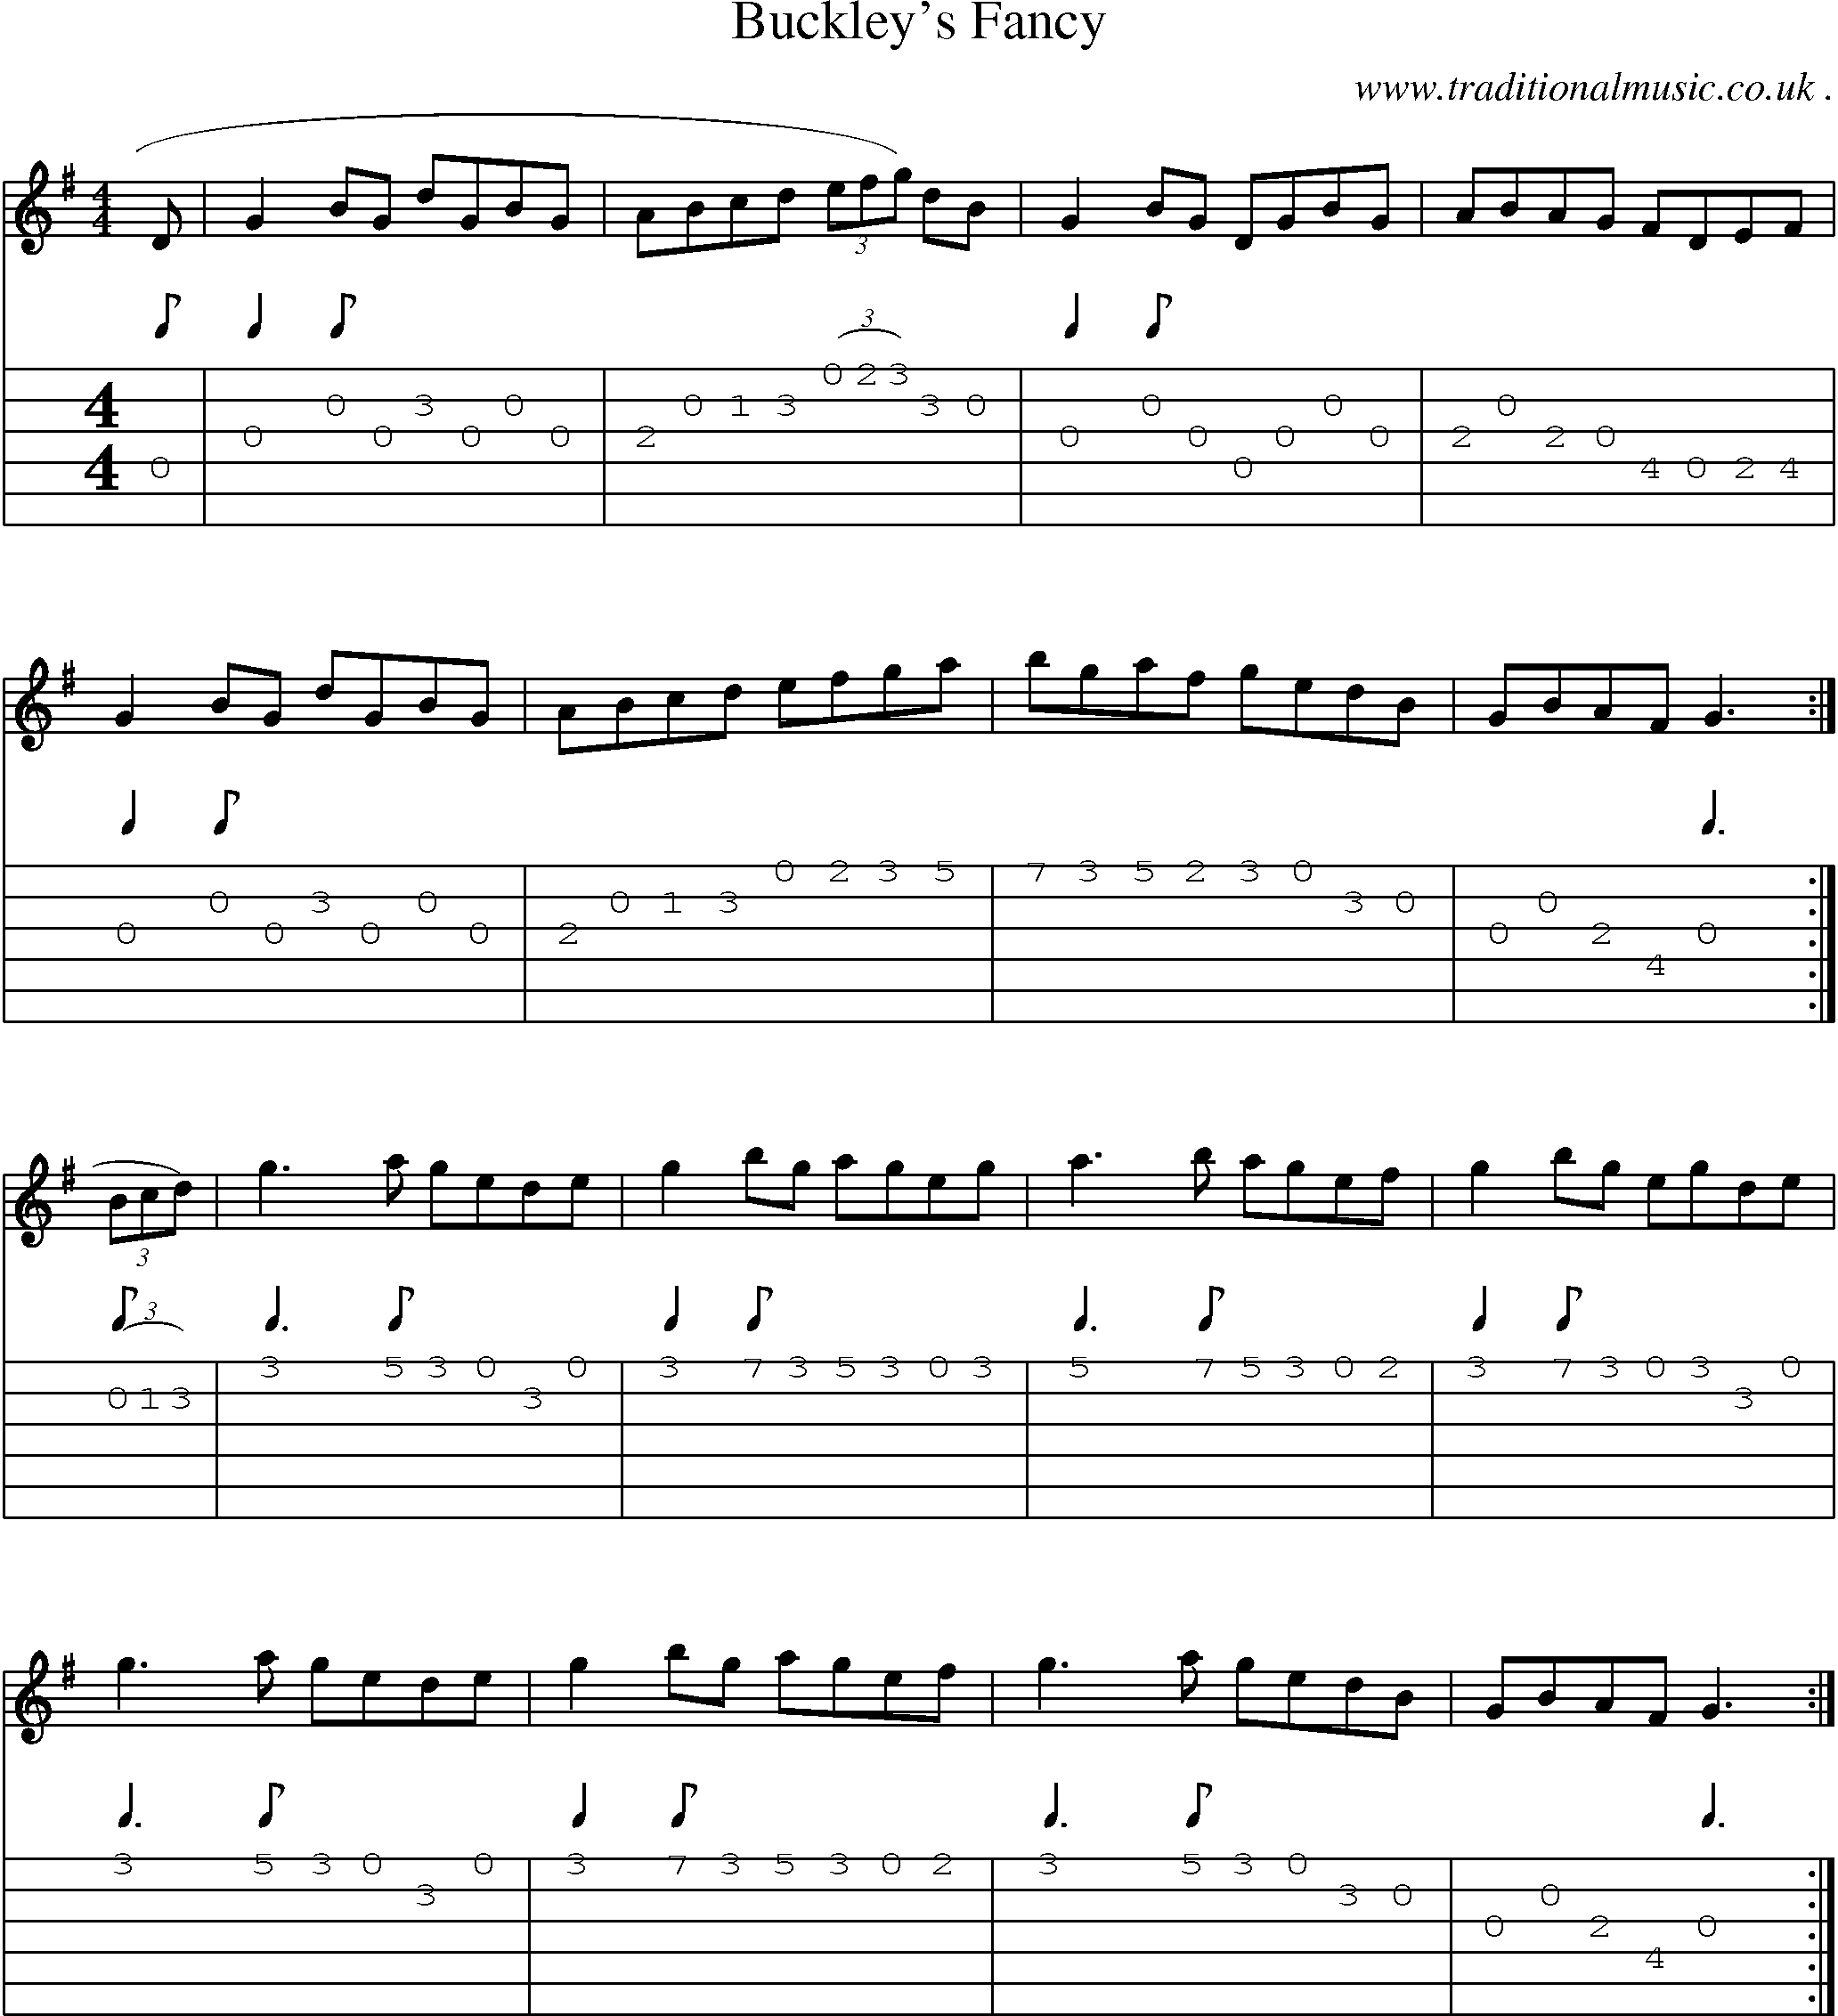 Sheet-Music and Guitar Tabs for Buckleys Fancy